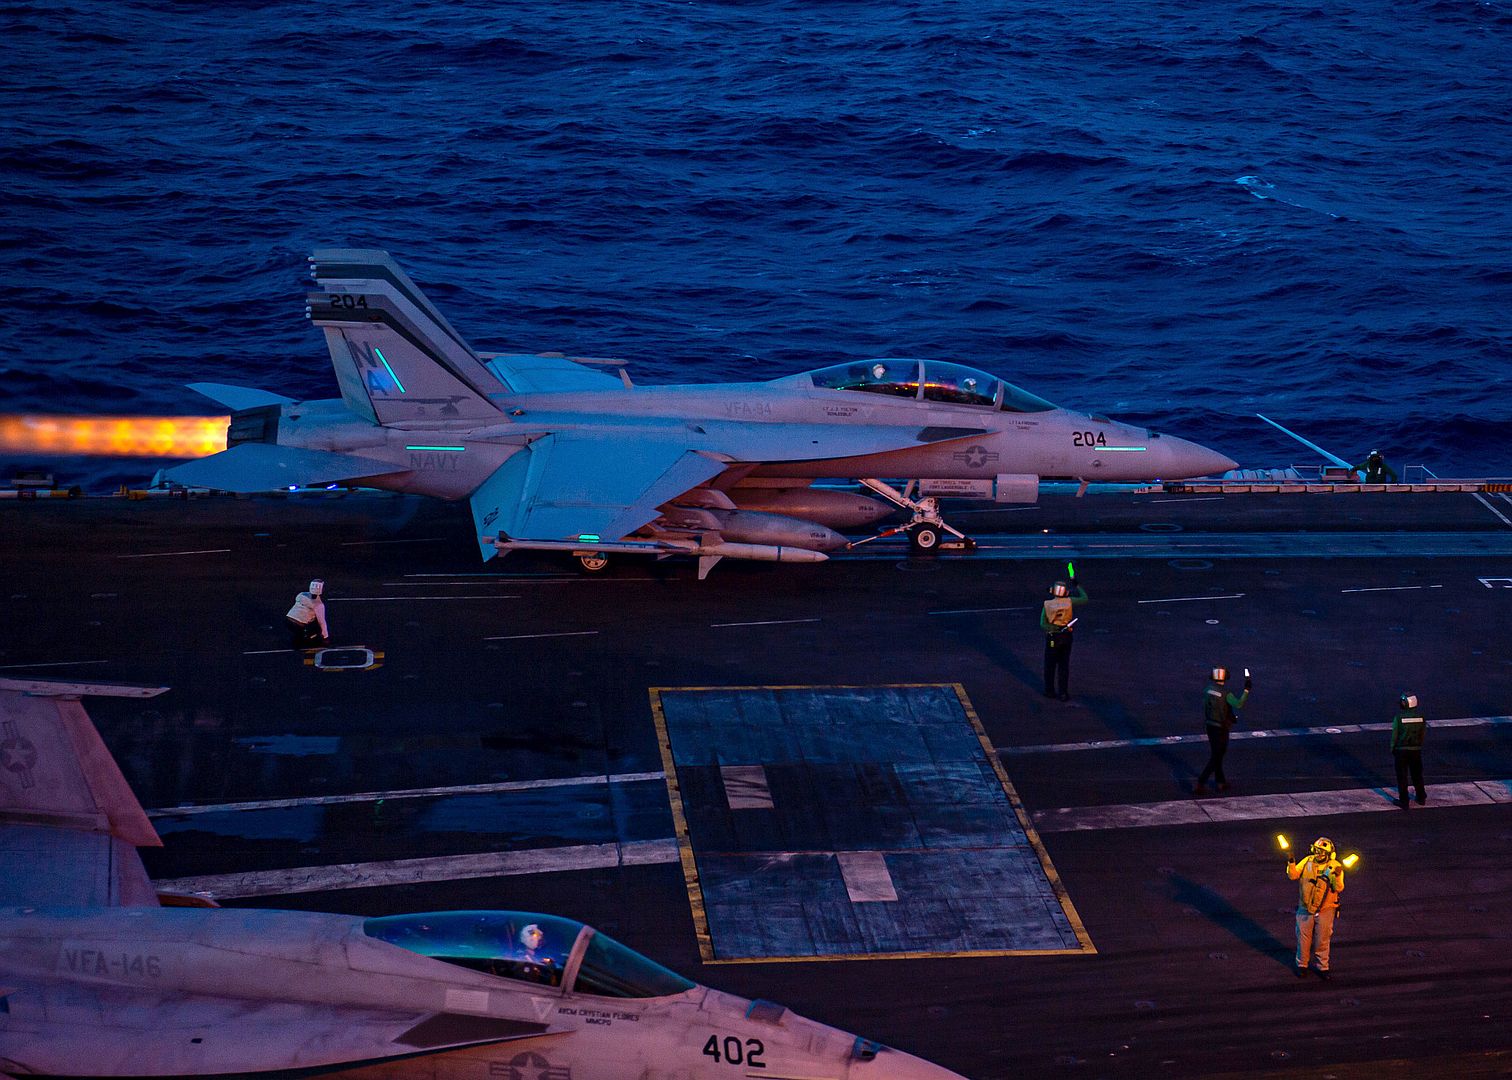 18F Super Hornet From The Mighty Shrikes Of Strike Fighter Squadron 94 Prepares To Launch Off The Flight Deck Of The Aircraft Carrier USS Nimitz